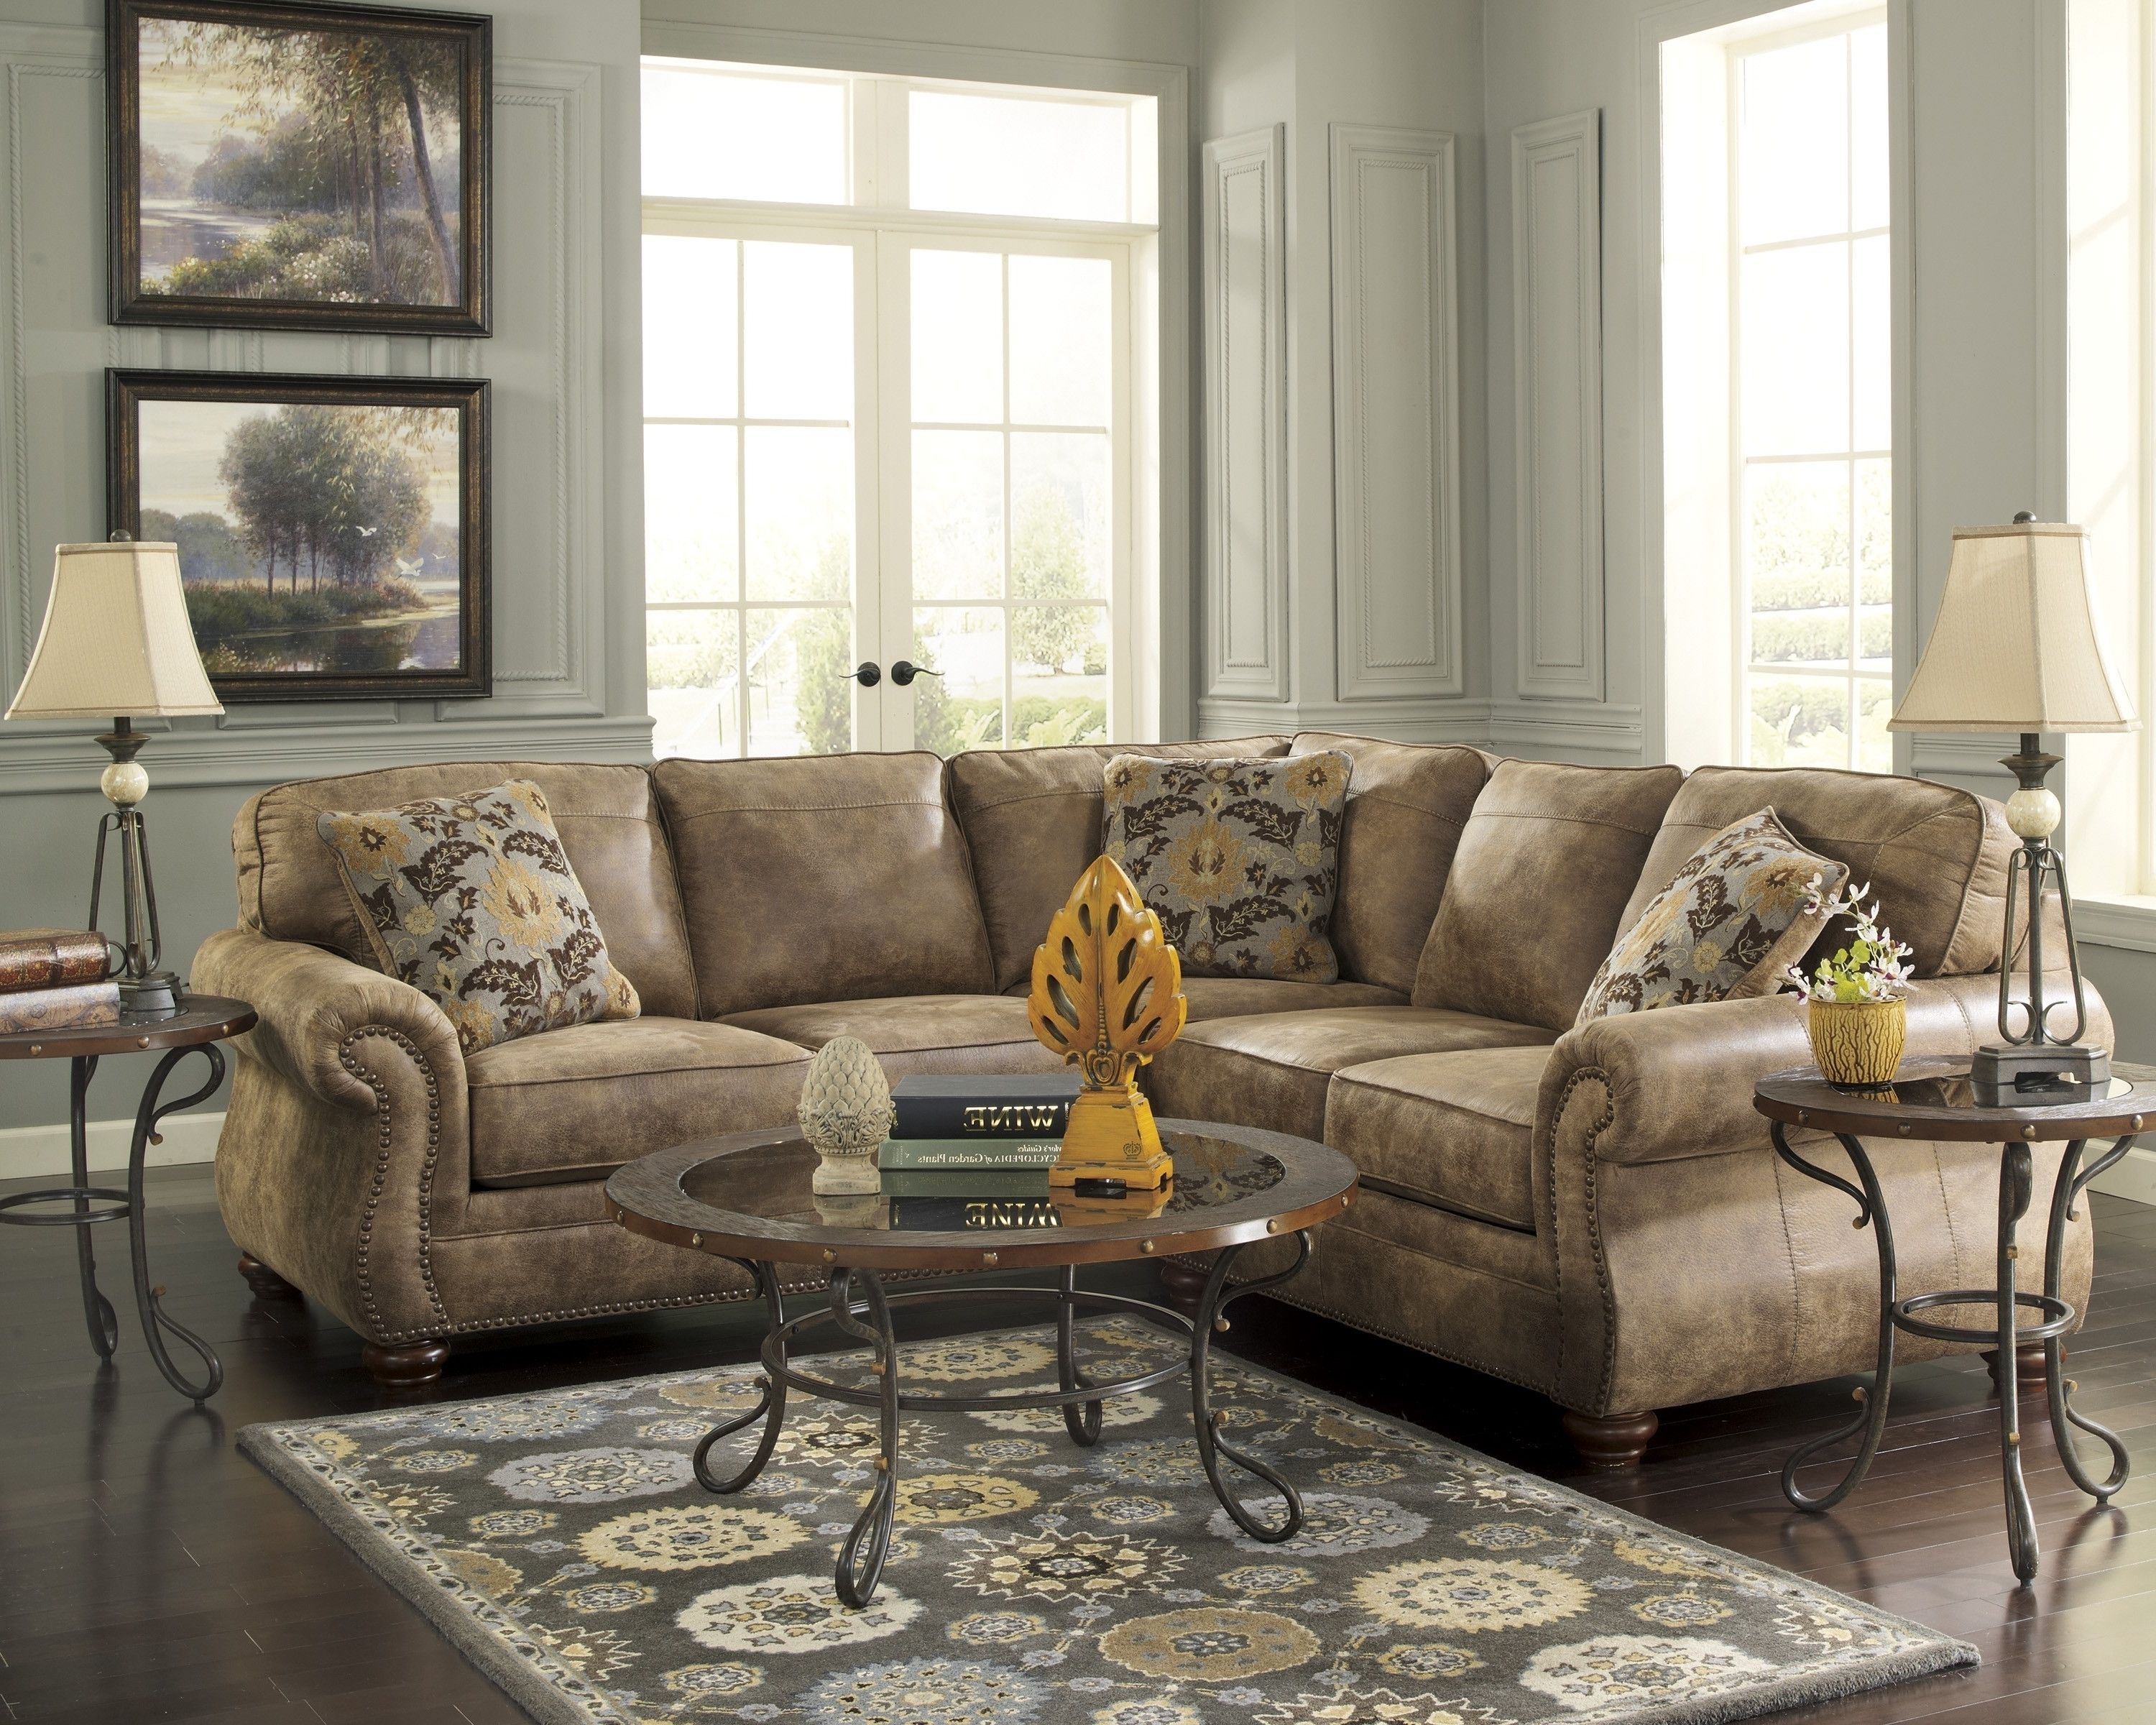 Stunning Sectional Sofas Tucson 90 For Your Olive Green Sectional Pertaining To Tucson Sectional Sofas (View 7 of 10)